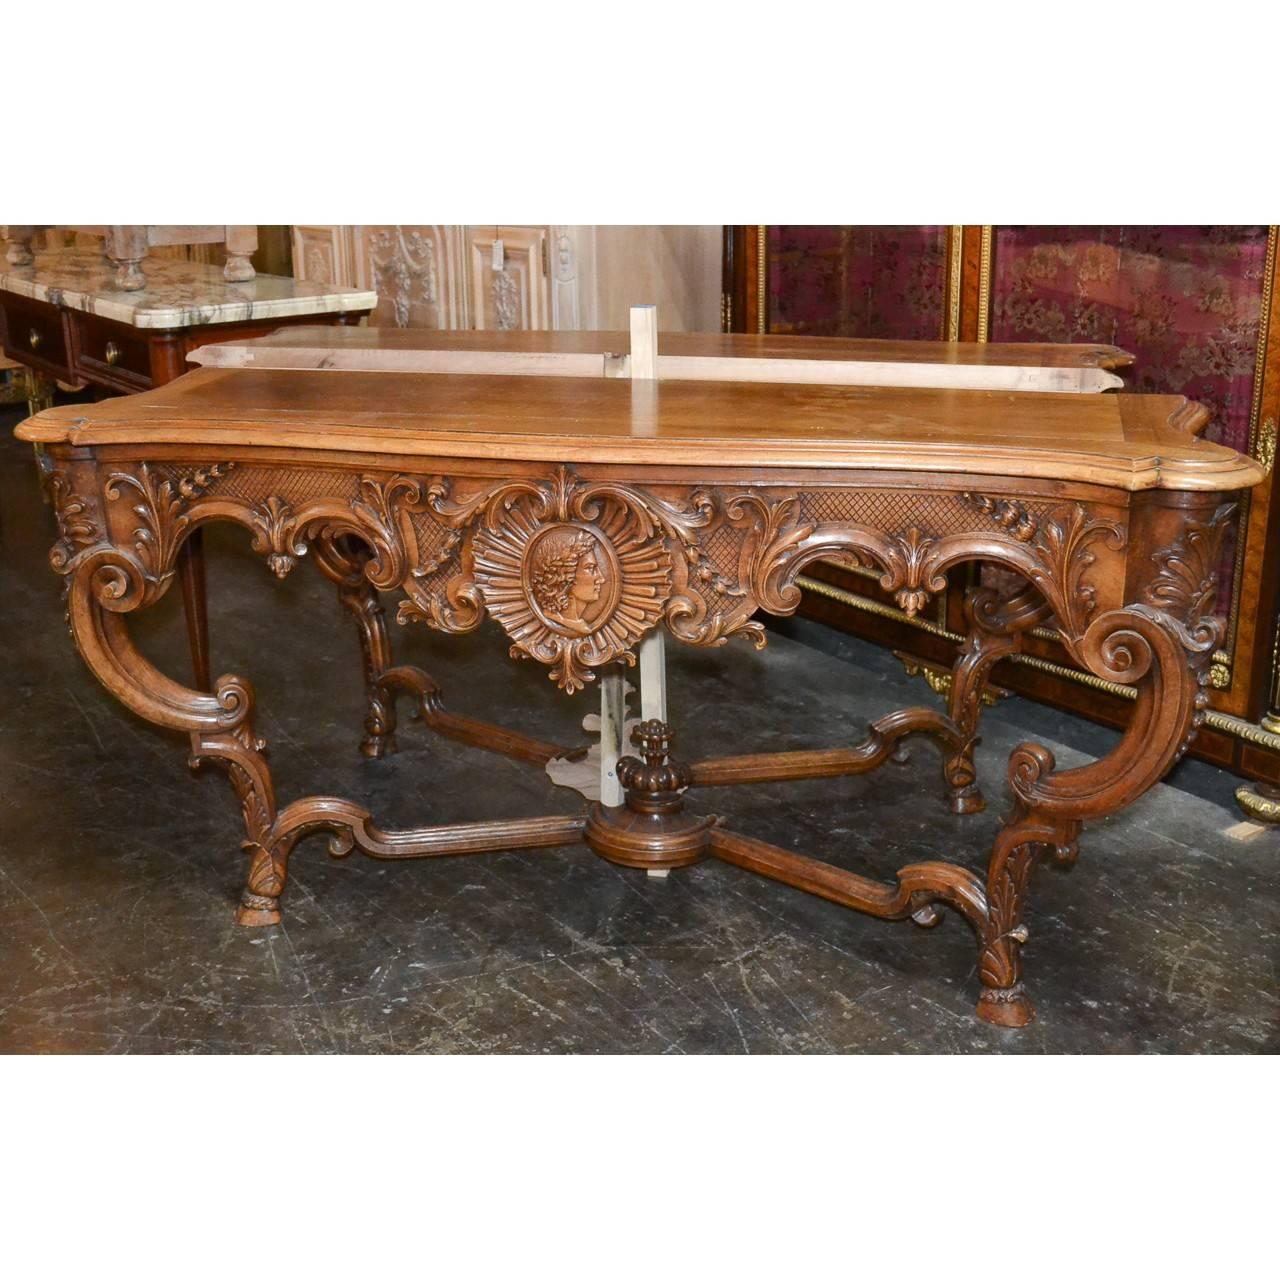 Stunning pair of 19th century French serpentine fronted walnut console tables. The shaped aprons with masterfully carved scrolling acanthus leaves centered by a shell and heart-shaped carving with a figural masque depicting in relief. The whole on